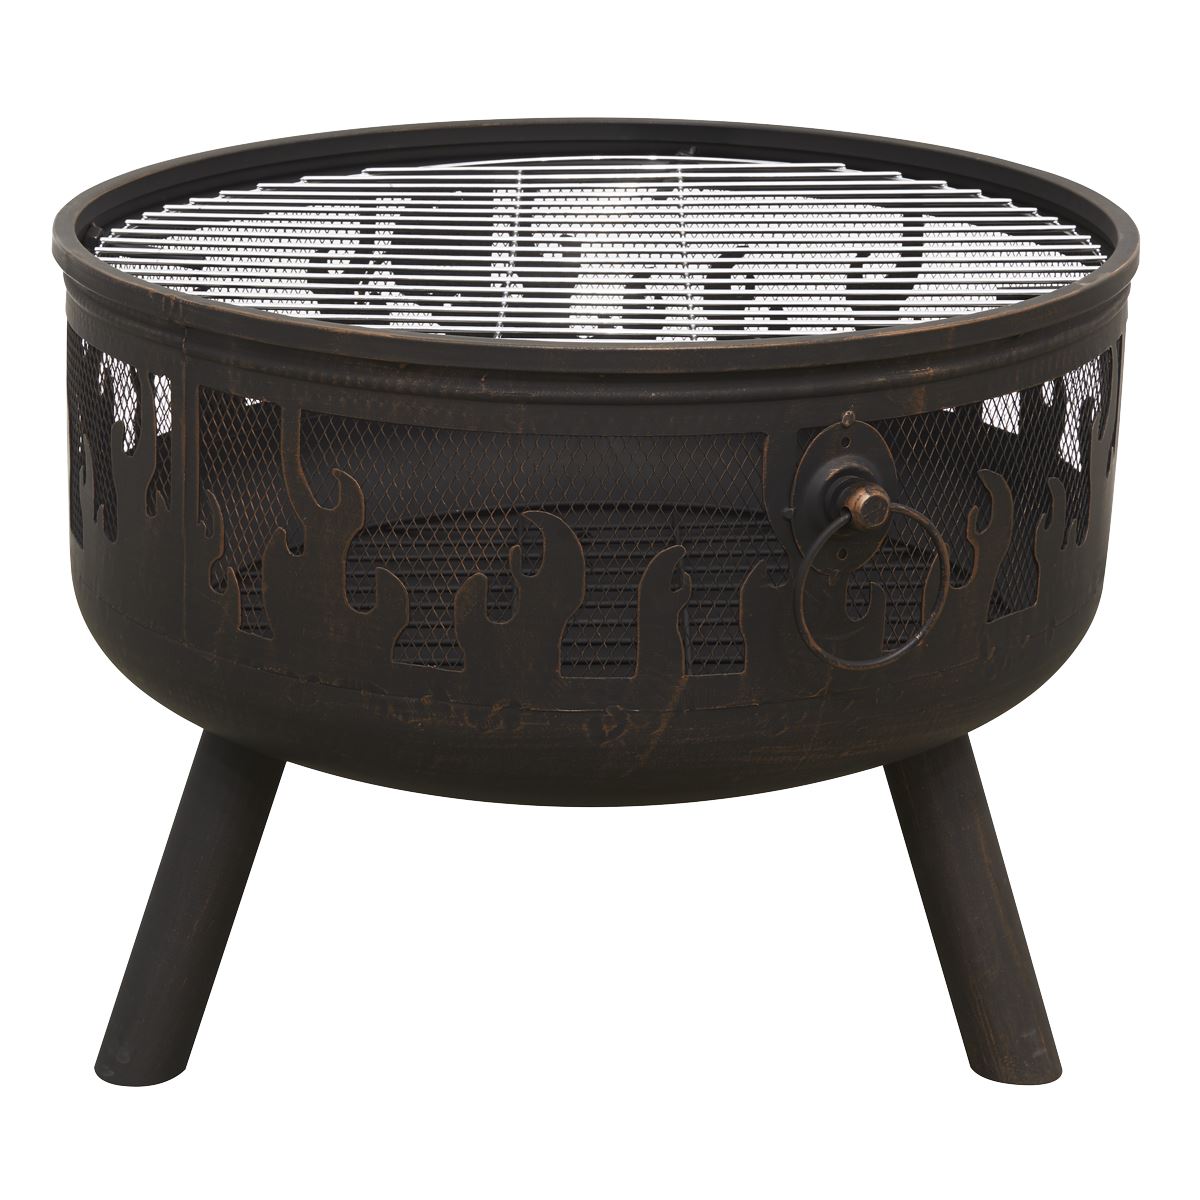 Dellonda Deluxe Firepit Fireplace Outdoor Patio Heater, Cooking Grill & Poker